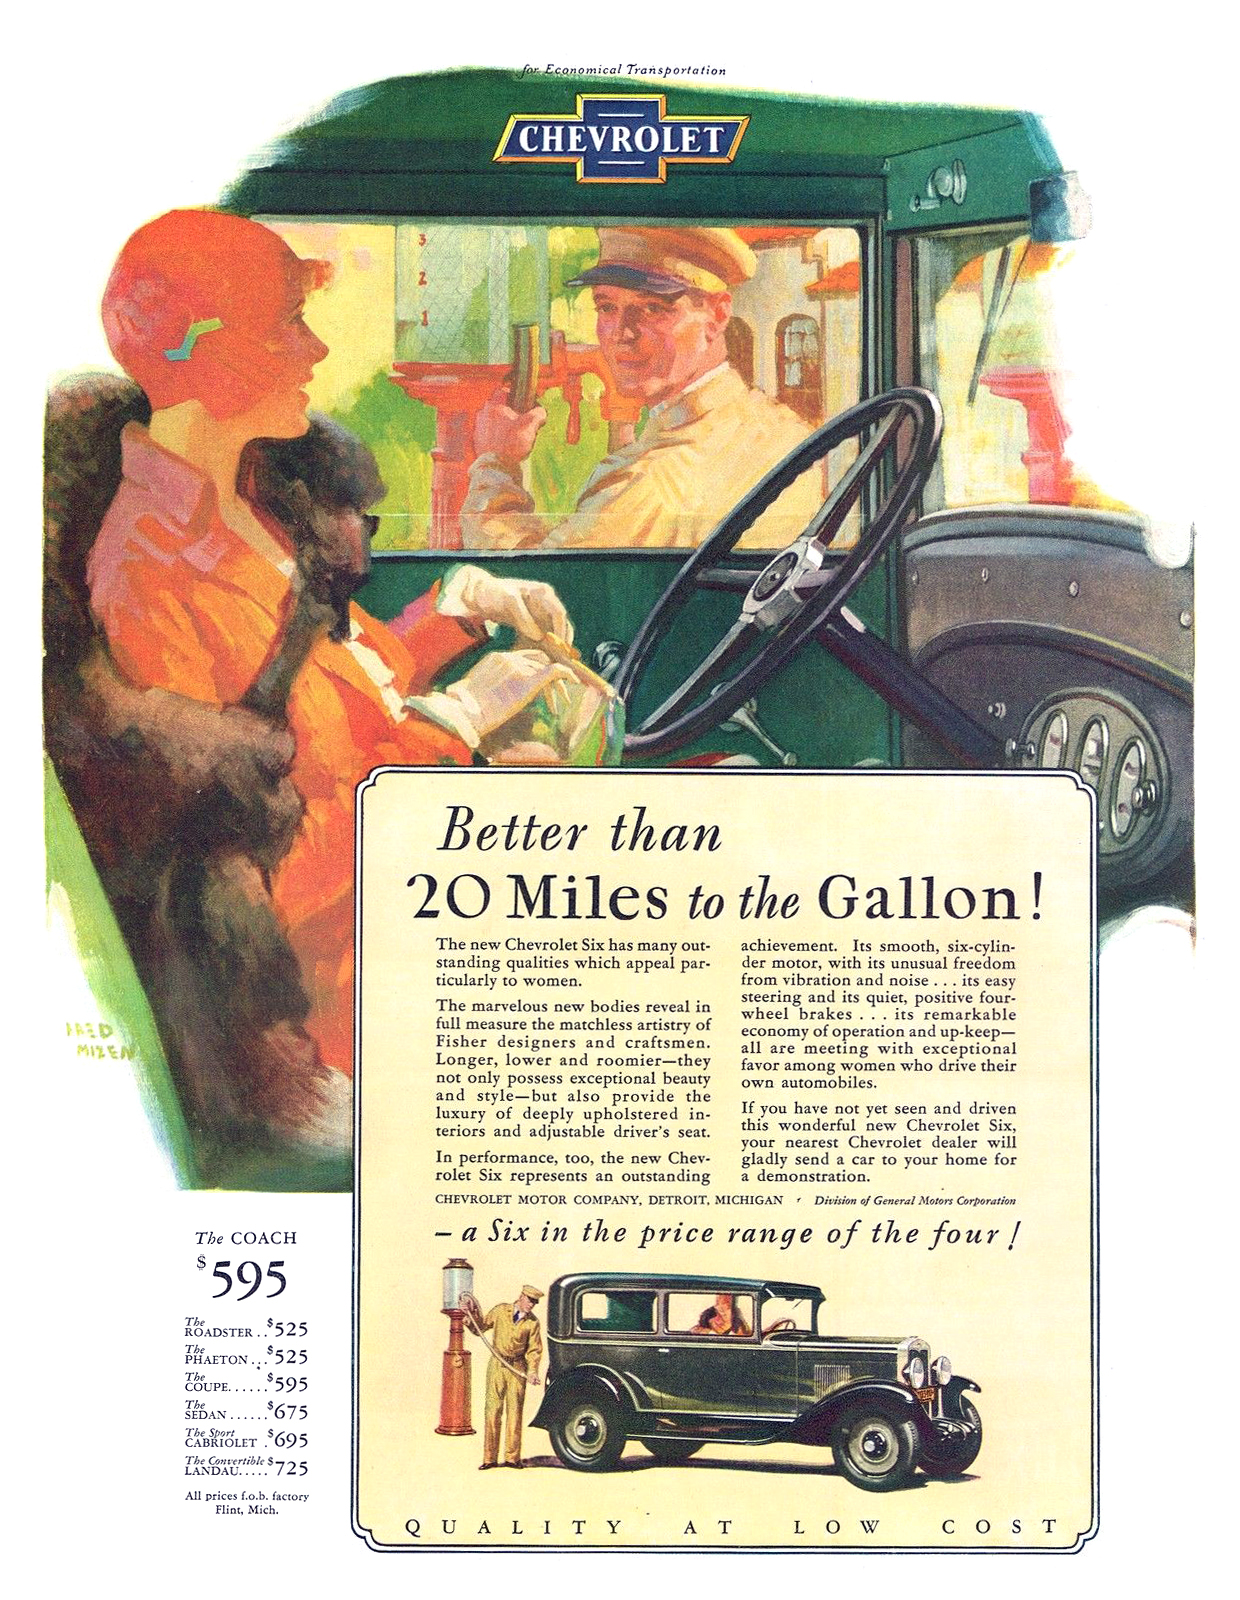 Chevrolet Six Coach Ad (March, 1929): Better than 20 Miles to the Gallon! - Illustrated by Fred Mizen